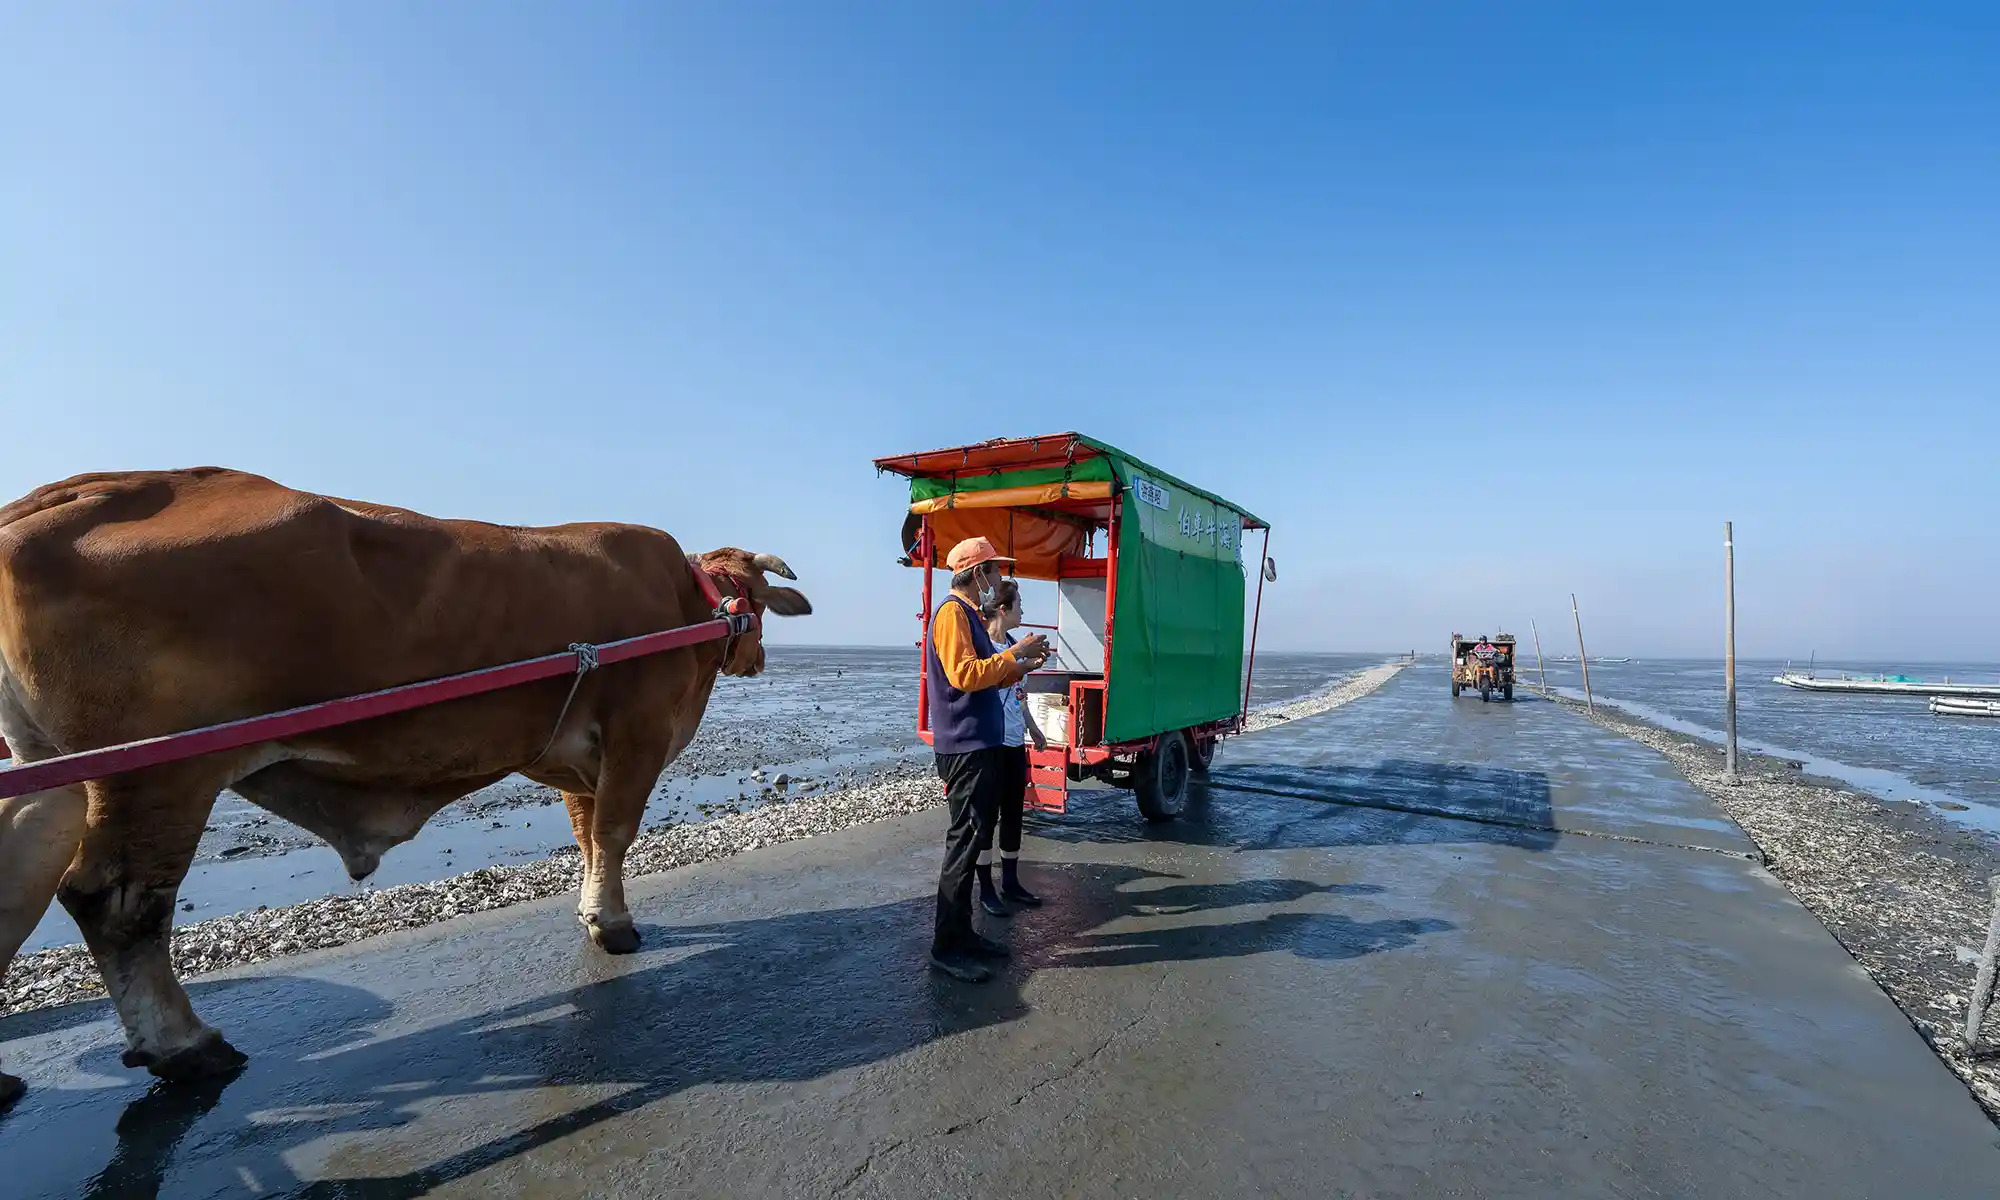 Oyster's farmers and their carts are stopped on the side of the road to the tidal flats west of Fangyuan.